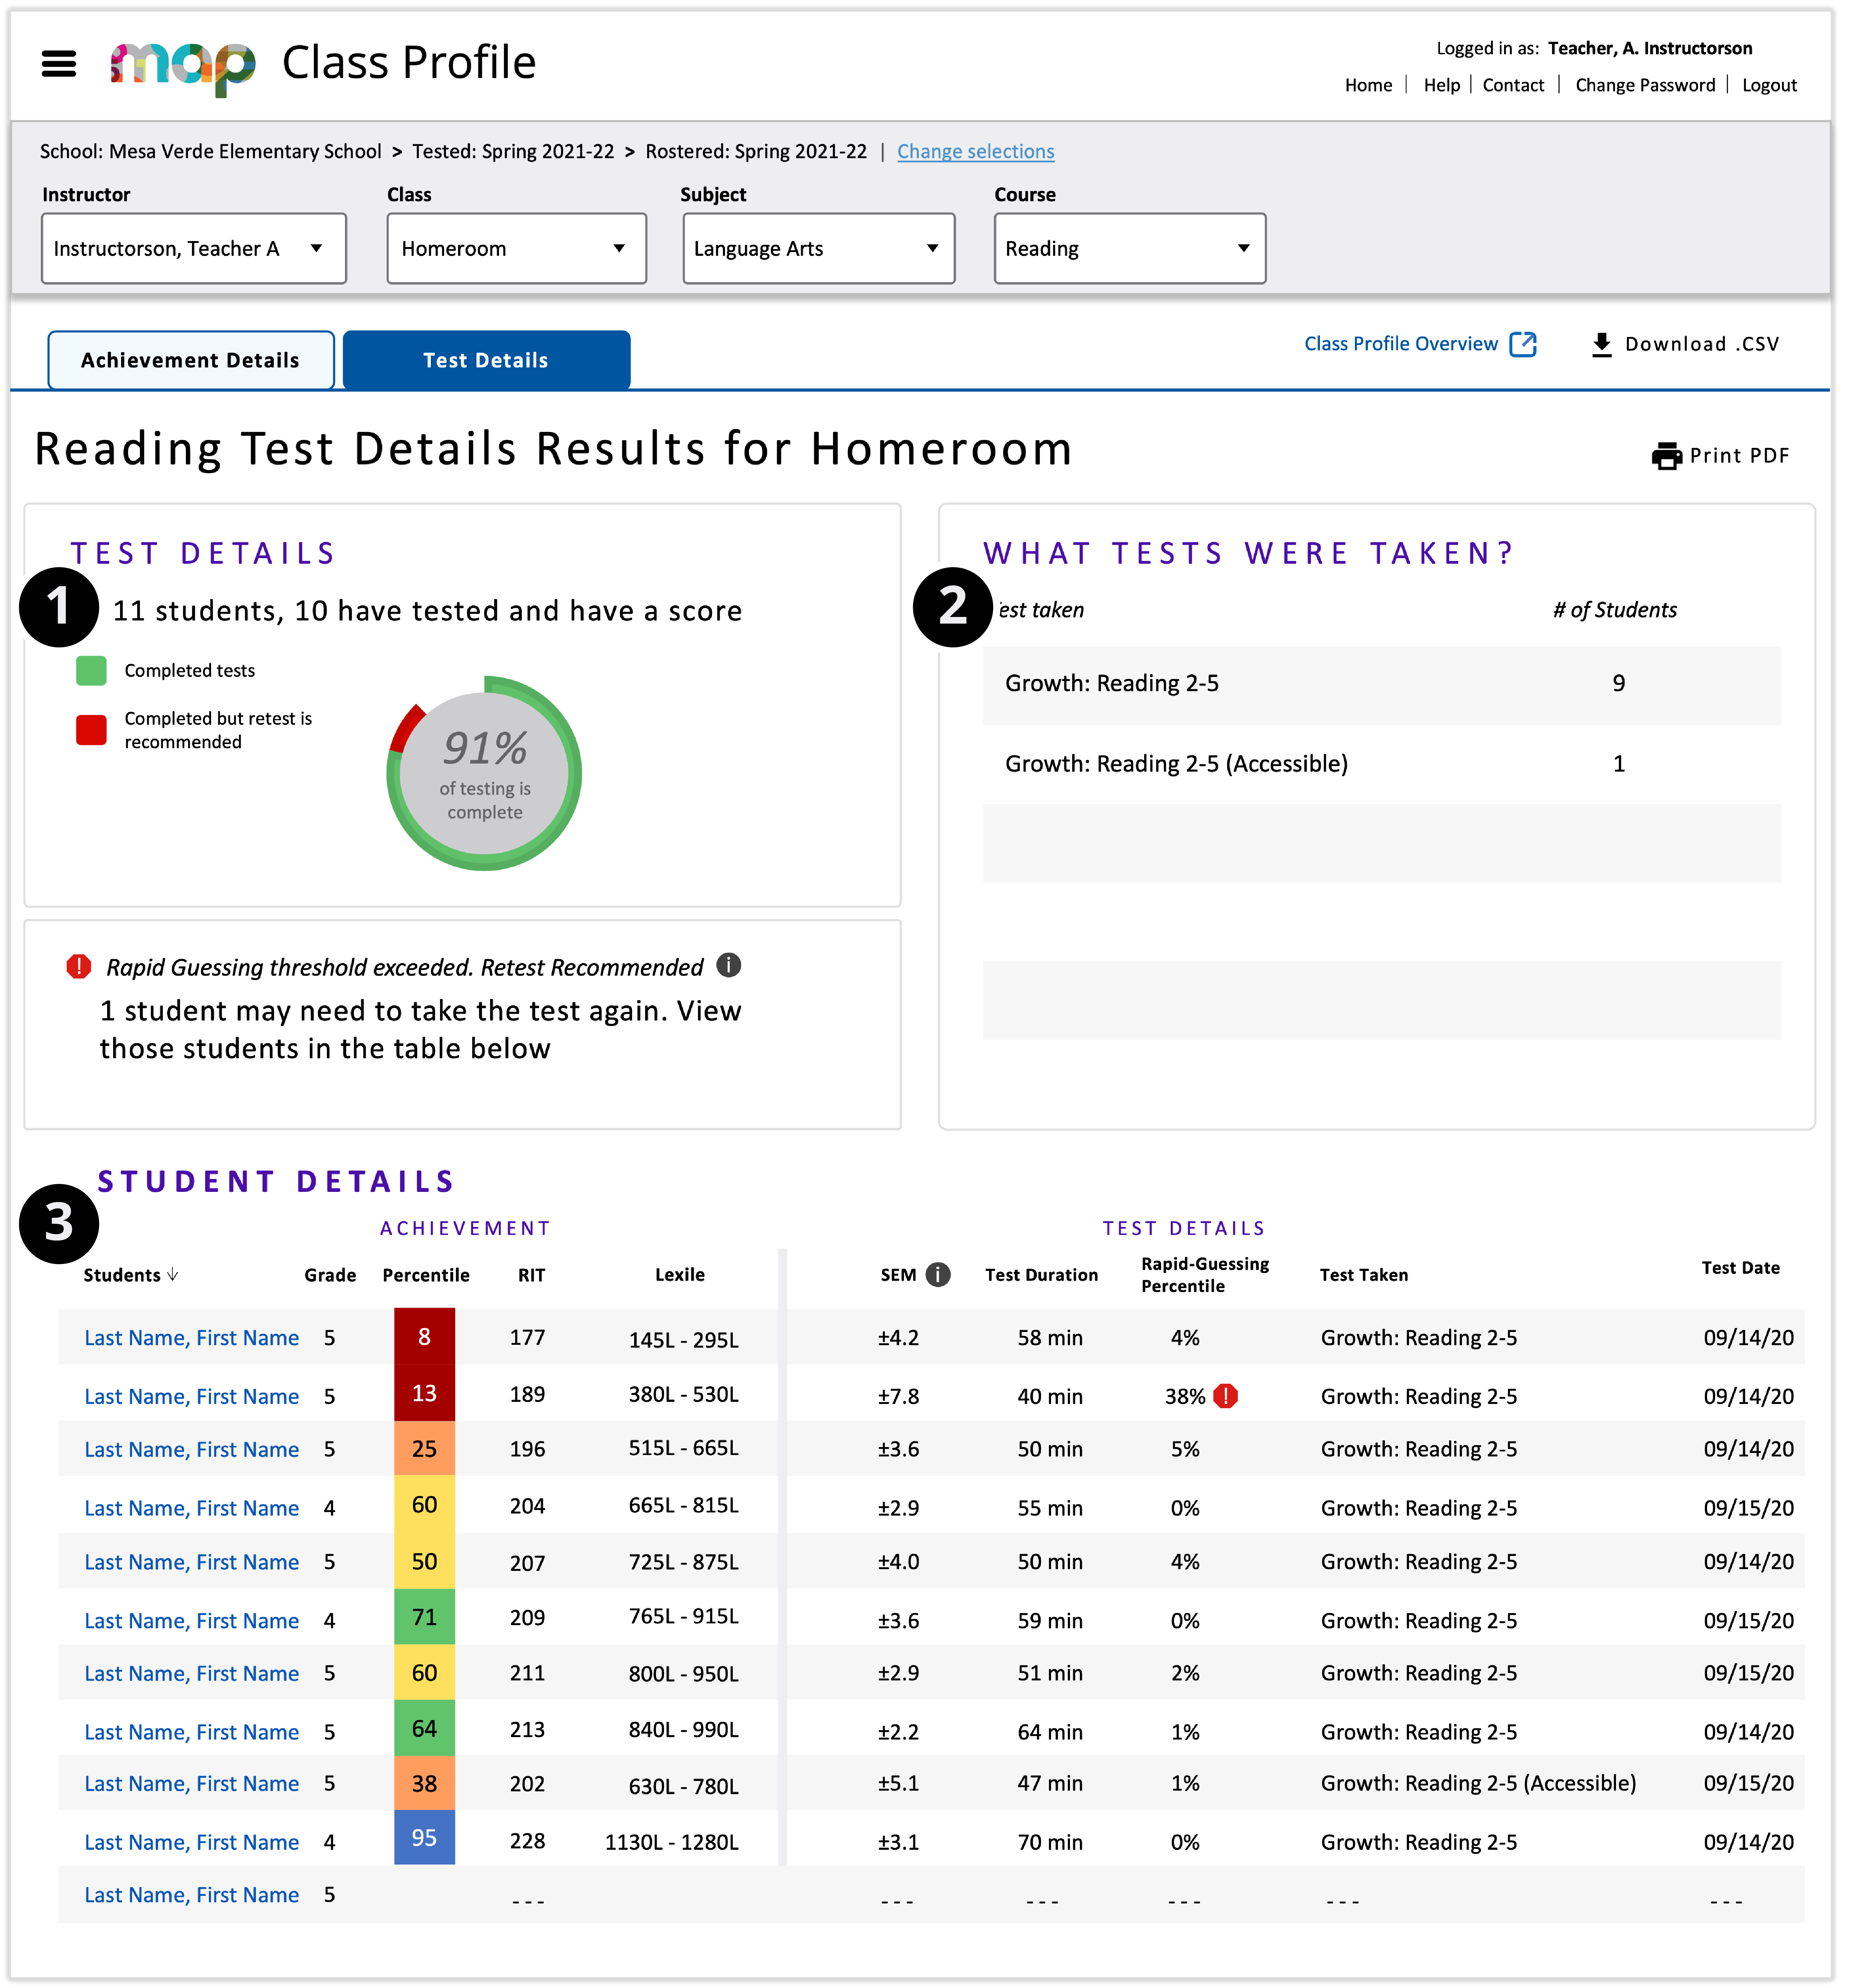 The Class Profile report with the Test Details tab, showing key features of the report, including Test Details, What Tests Were Taken, and Student Details